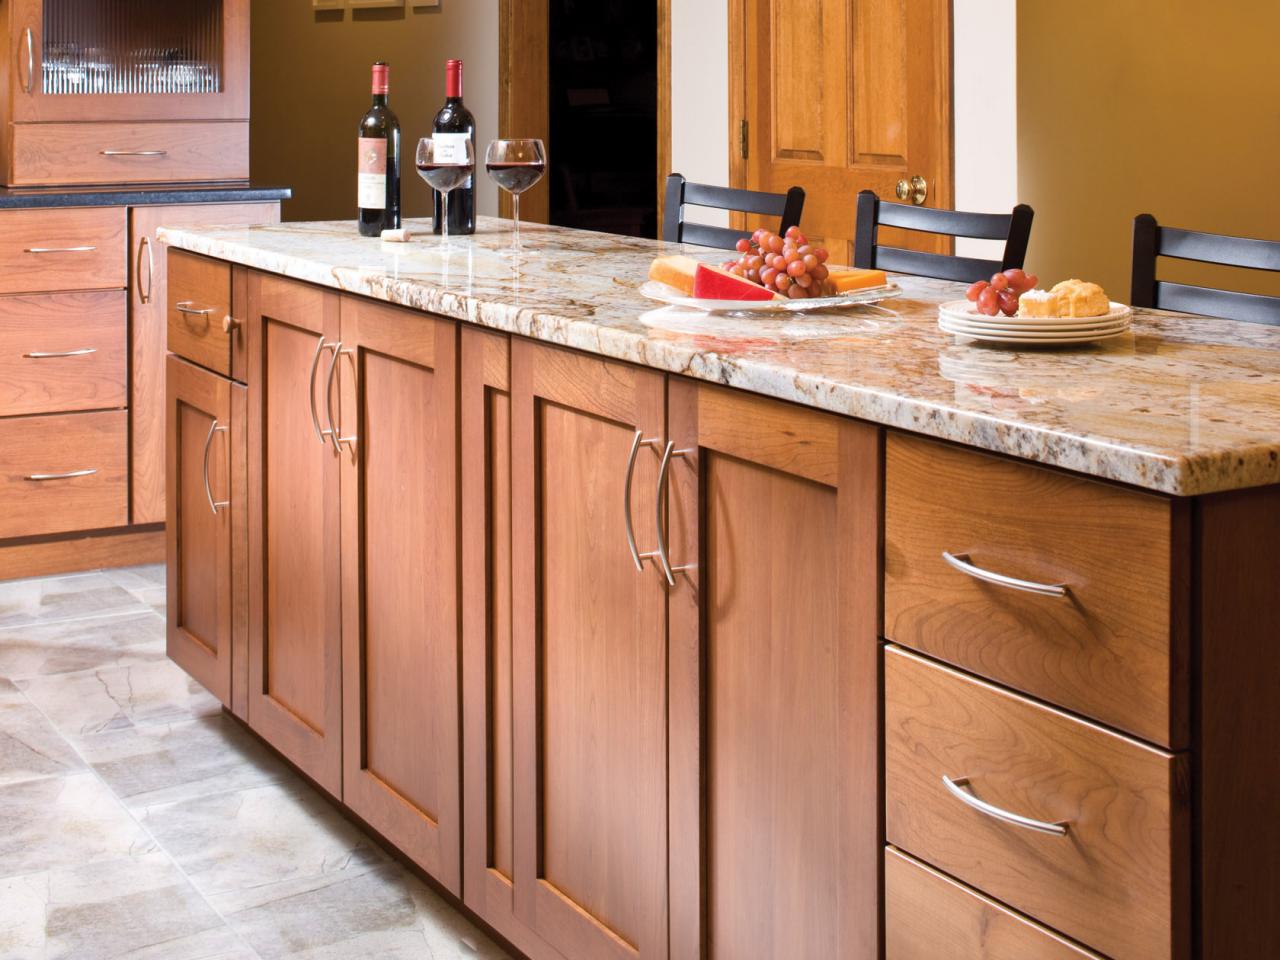 Cheap Kitchen Cabinets Pictures Options Tips Ideas HGTV